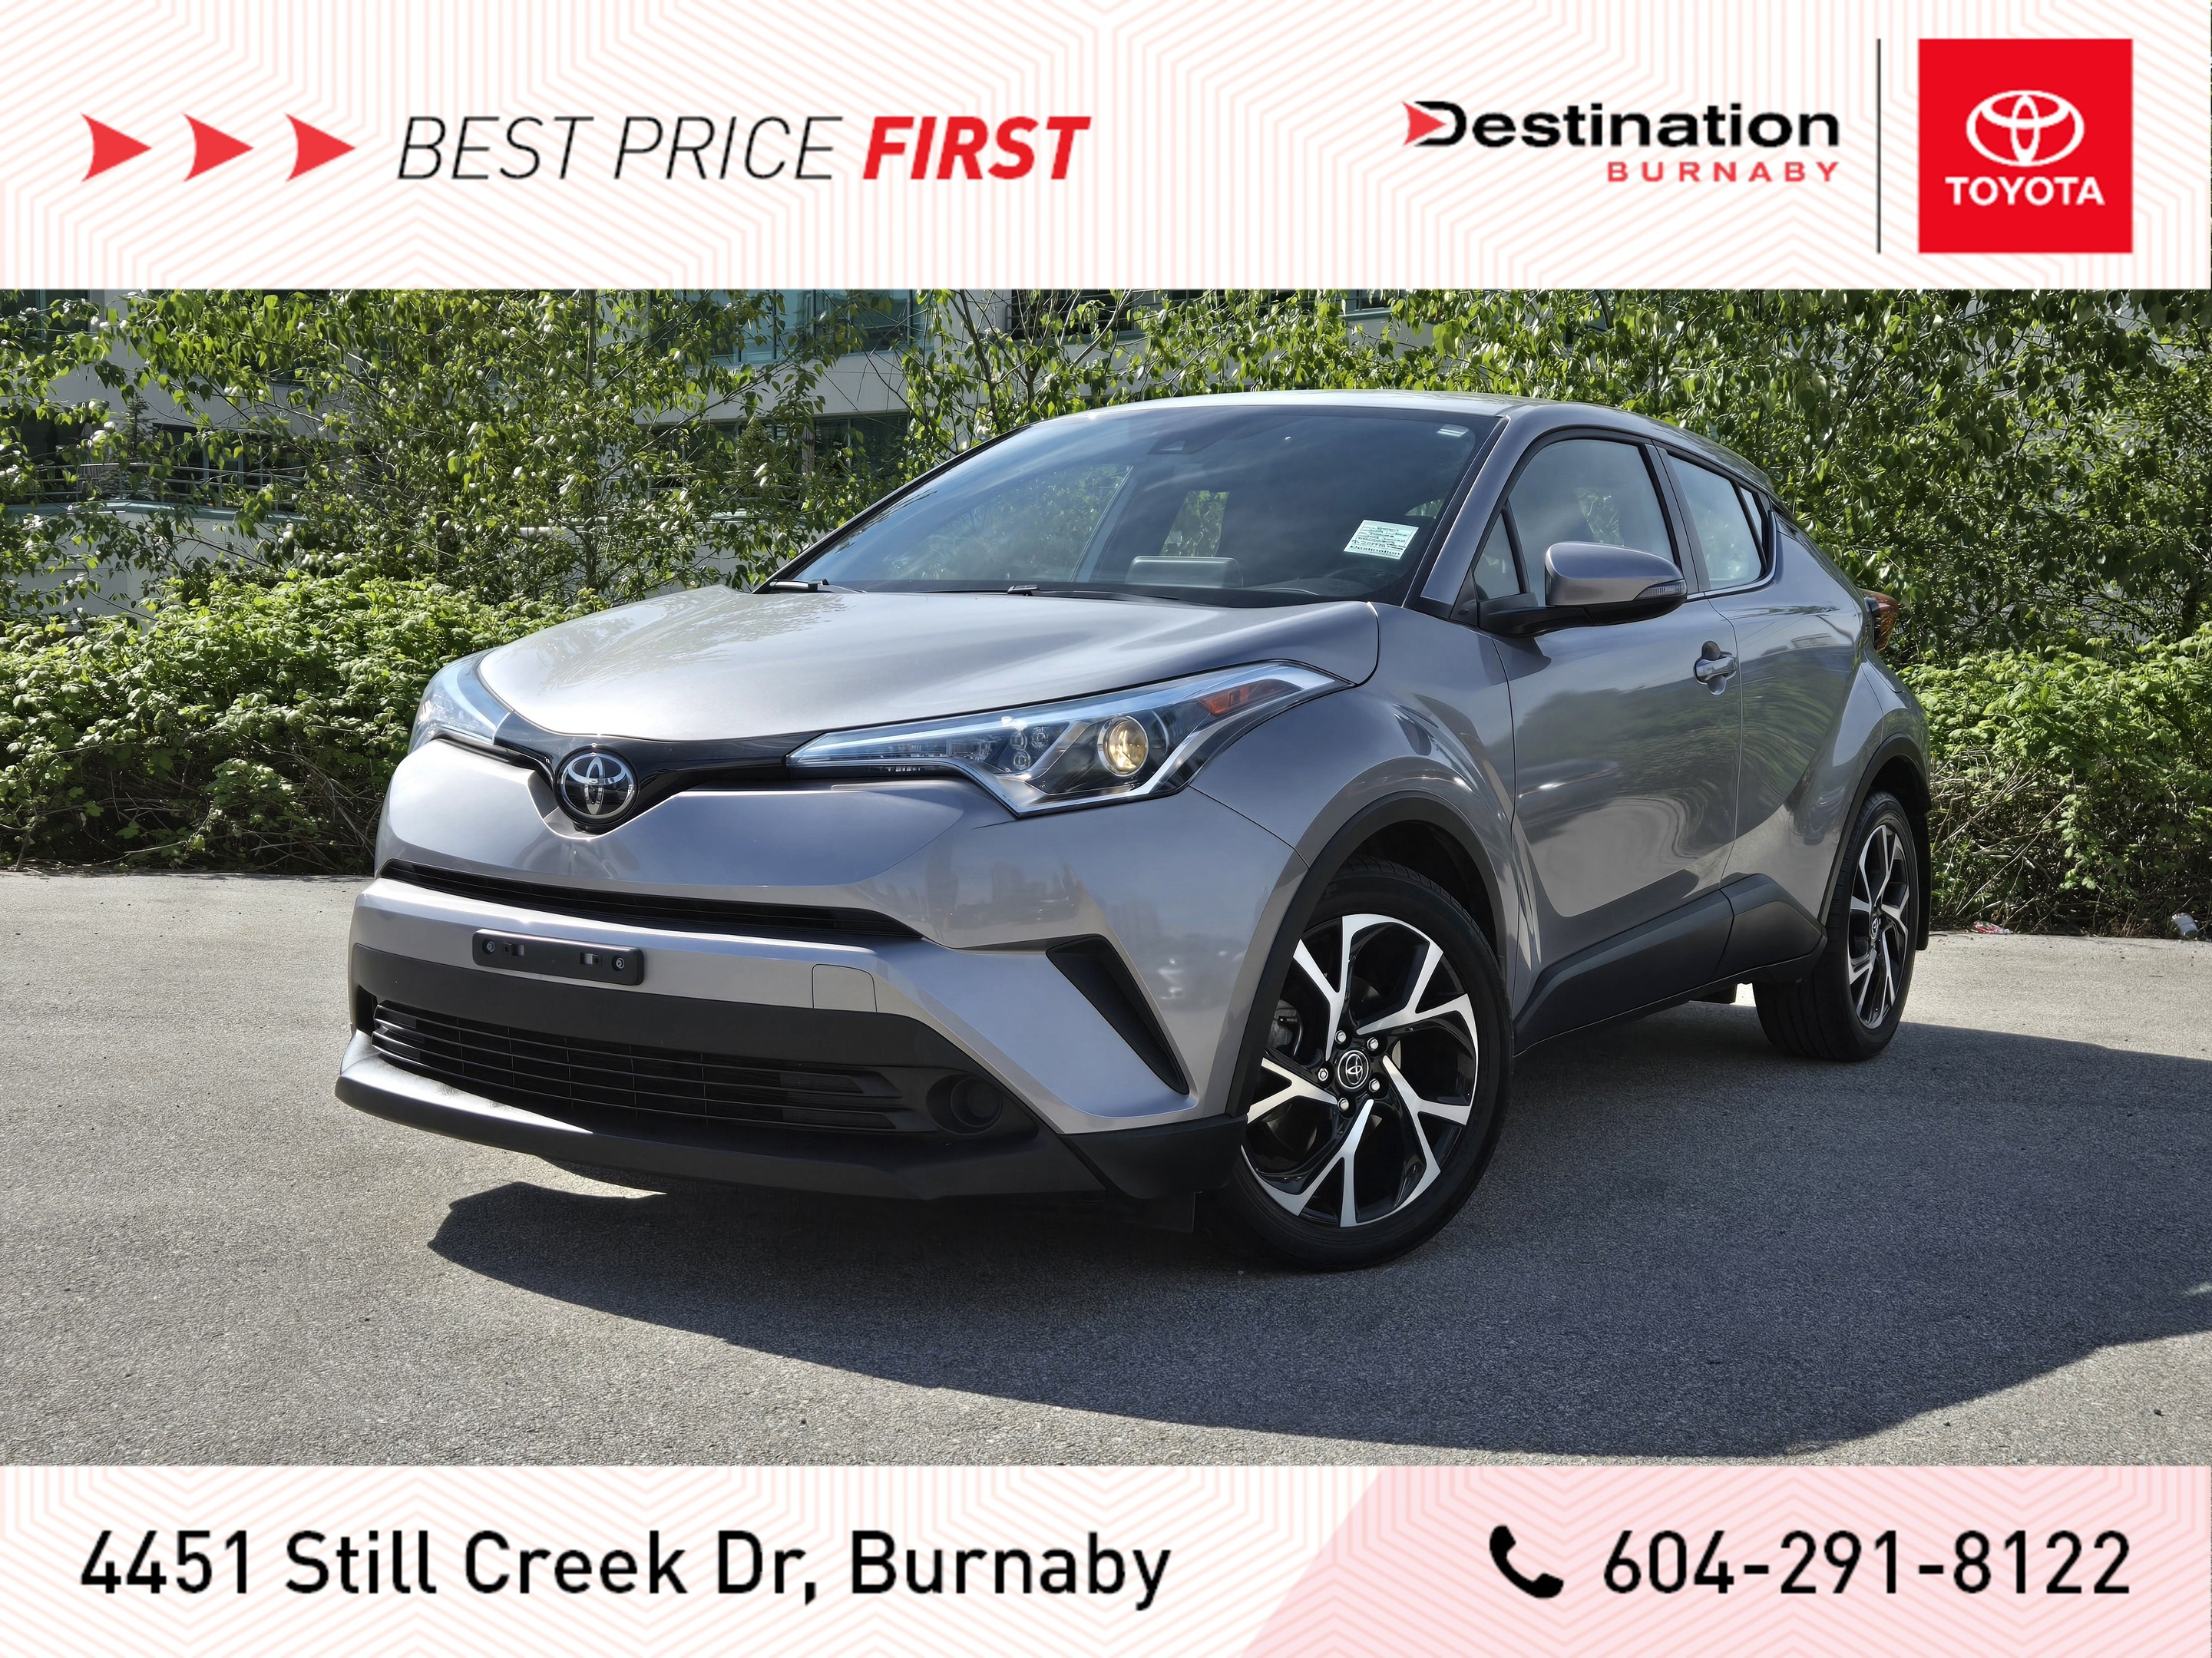 2019 Toyota C-HR Limited - Local BC Car, Fully Loaded, Low KMS!